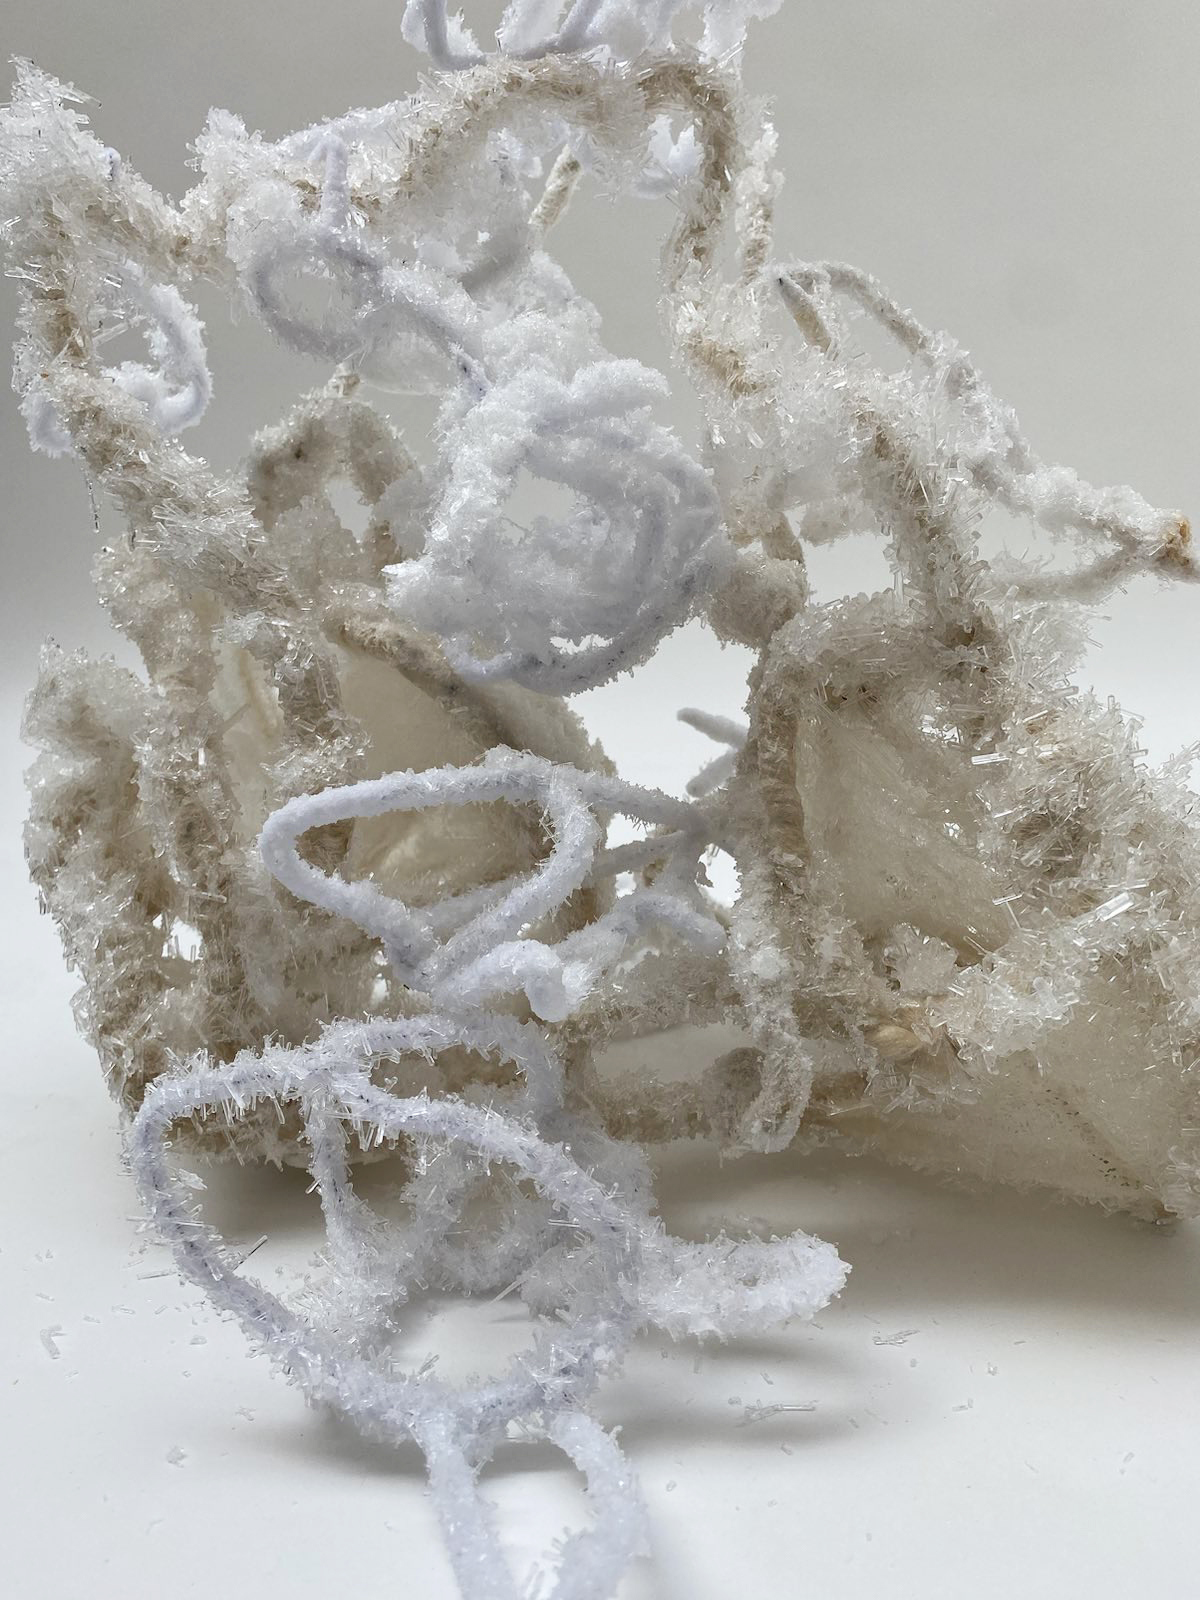 An image of a white and beige intertwined mass covered in large needle salt crystals.